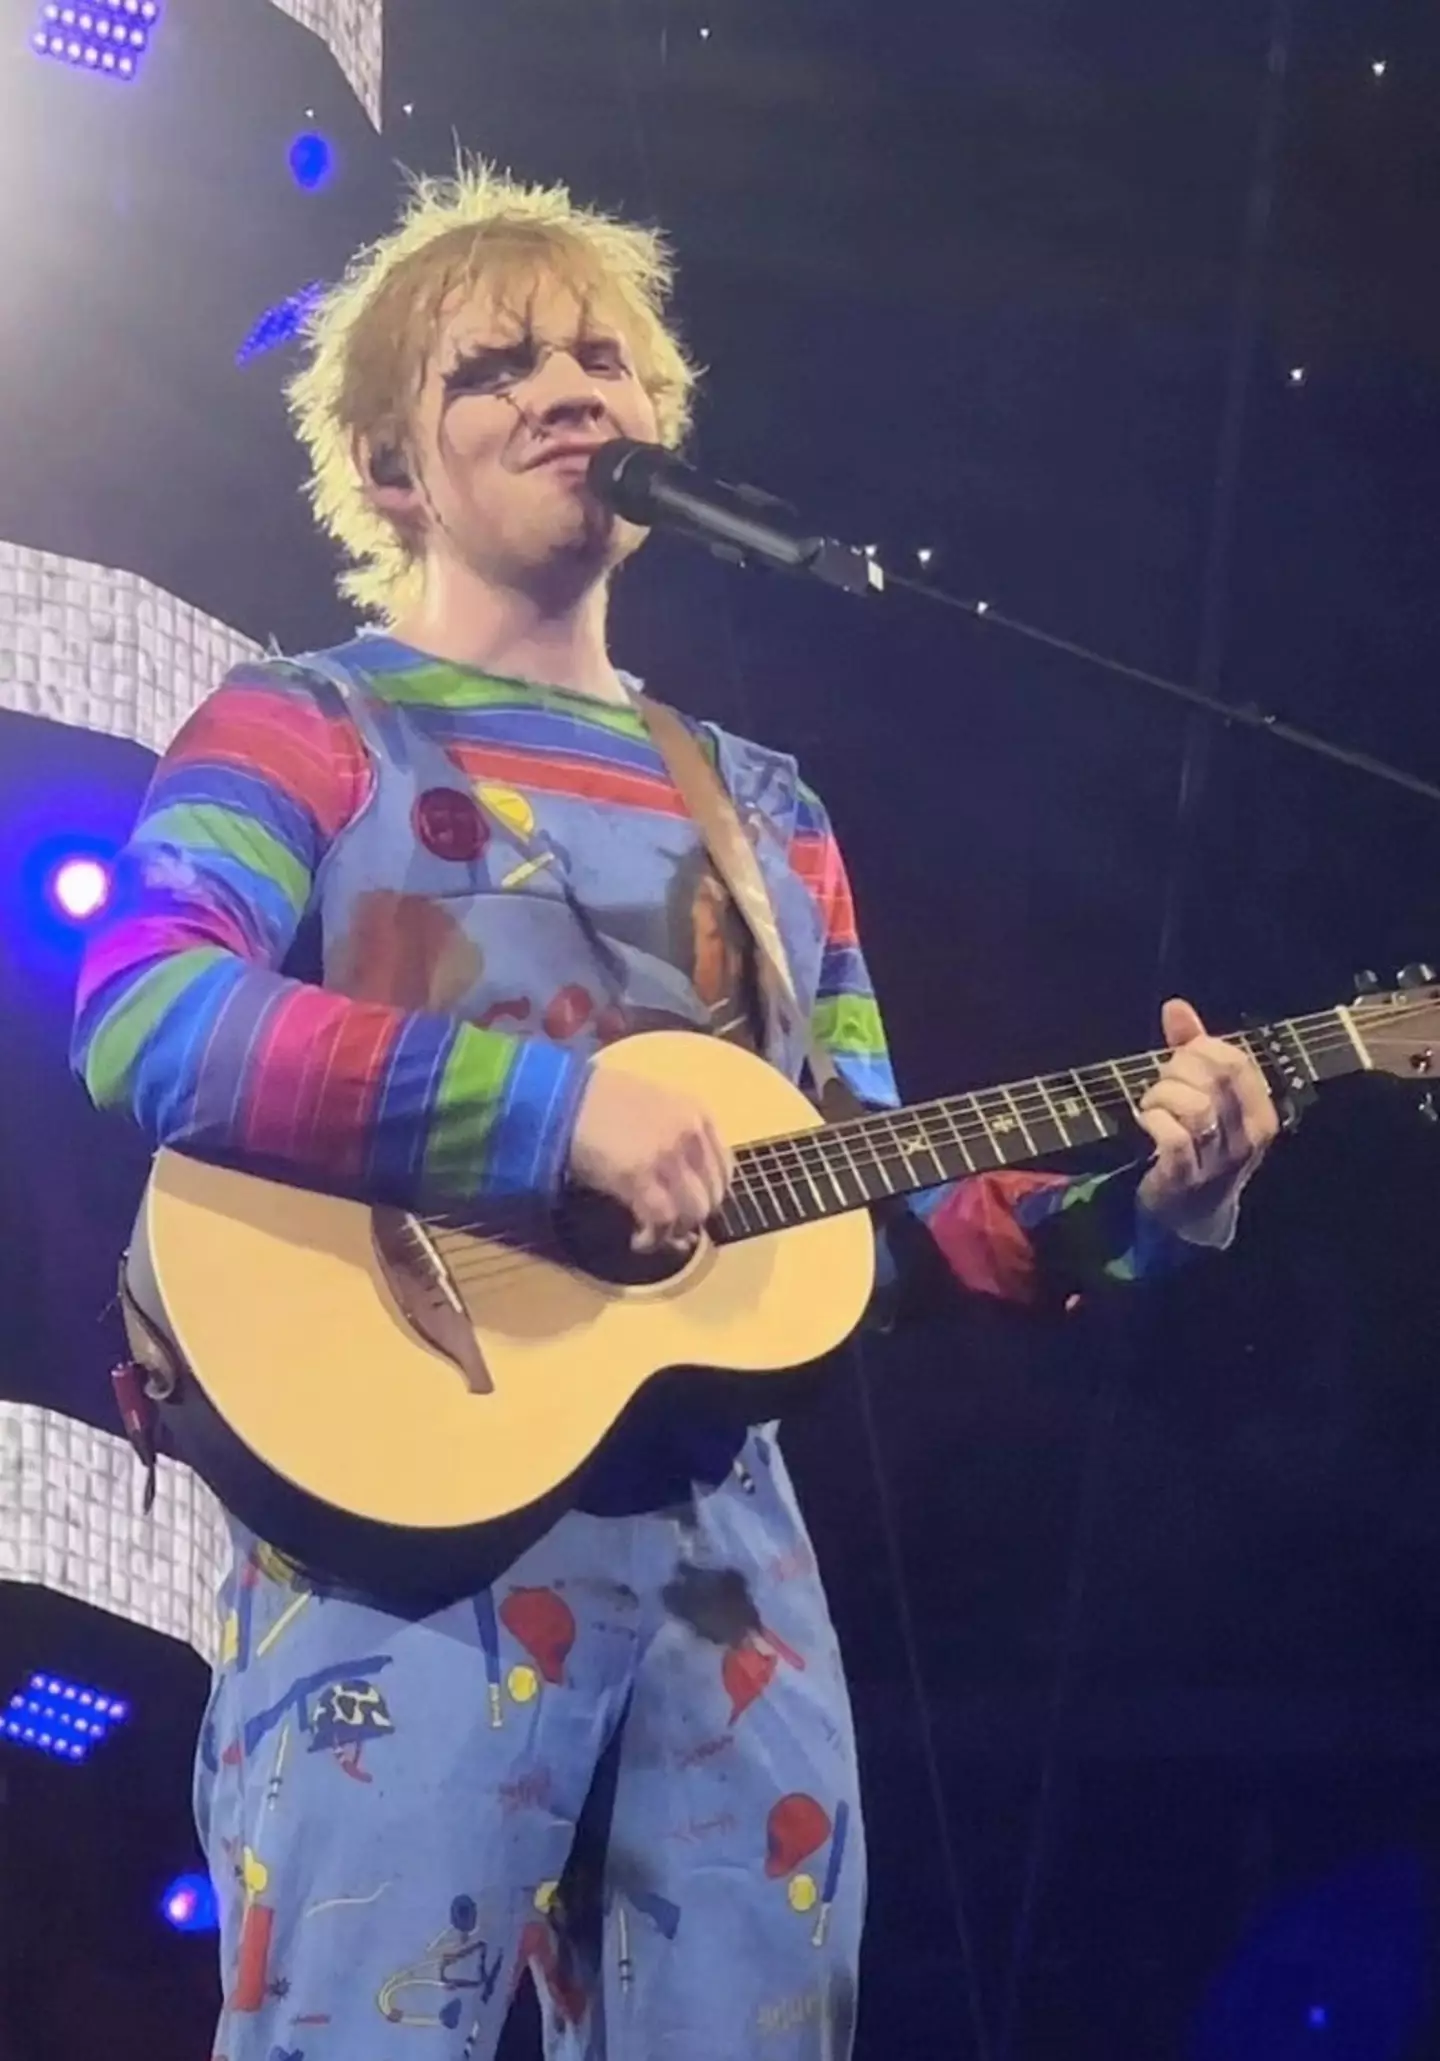 Ed Sheeran dressed up as a fellow famous redhead Chucky for Halloween.